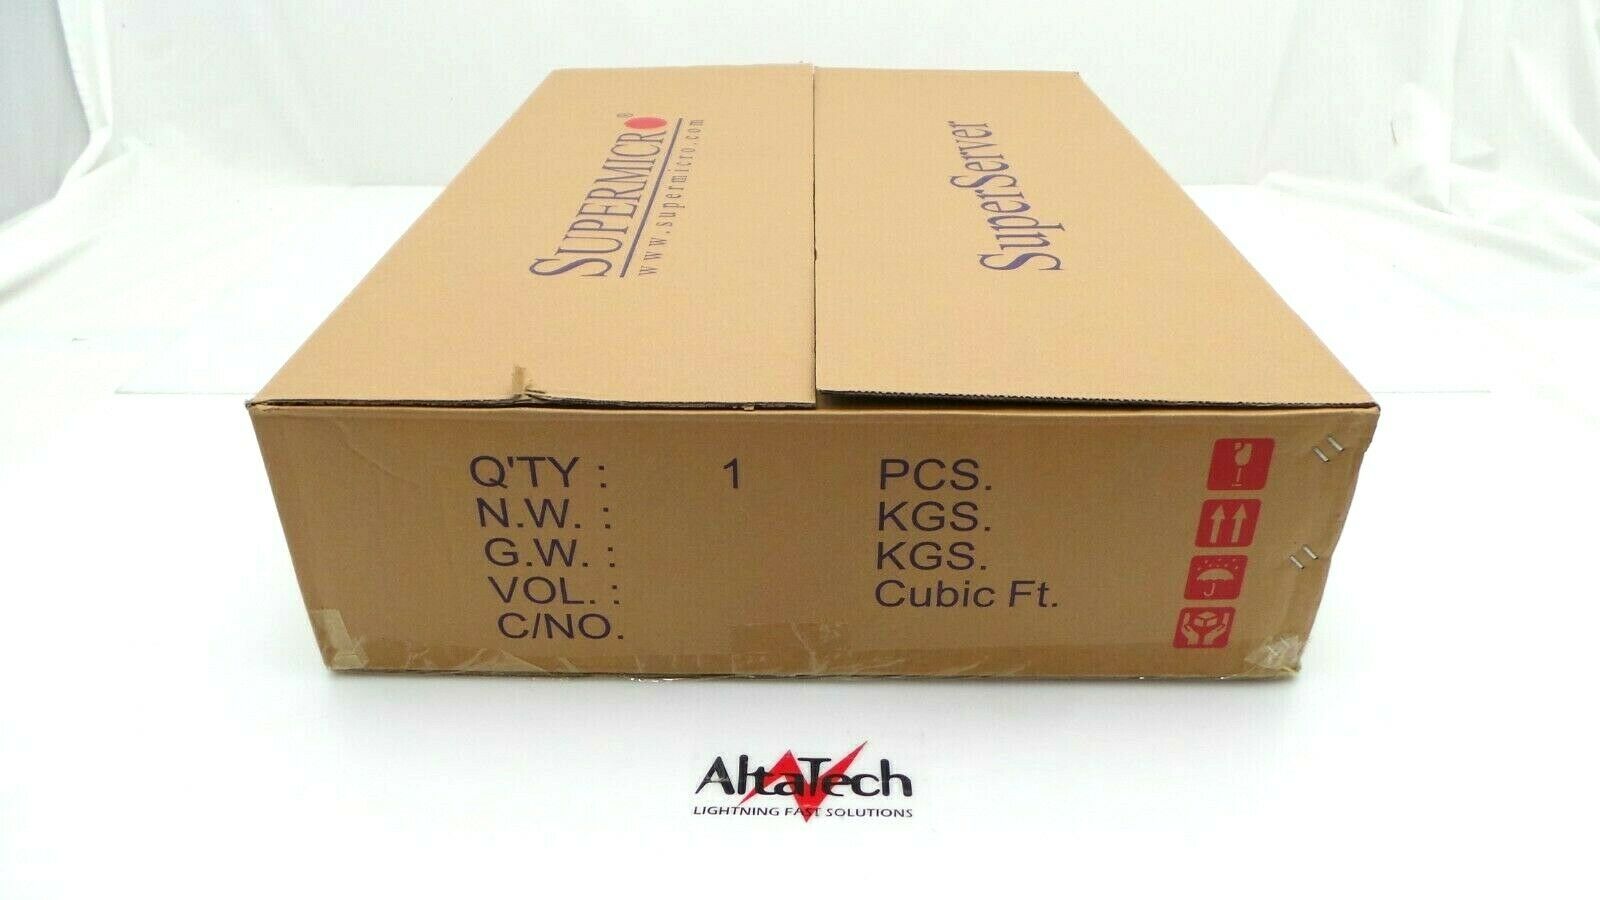 SuperMicro SYS-1029P-WTR_NEW 1U SuperServer 2x 8GB Memory 1.70 GHz CPU 750W PSU, New Sealed